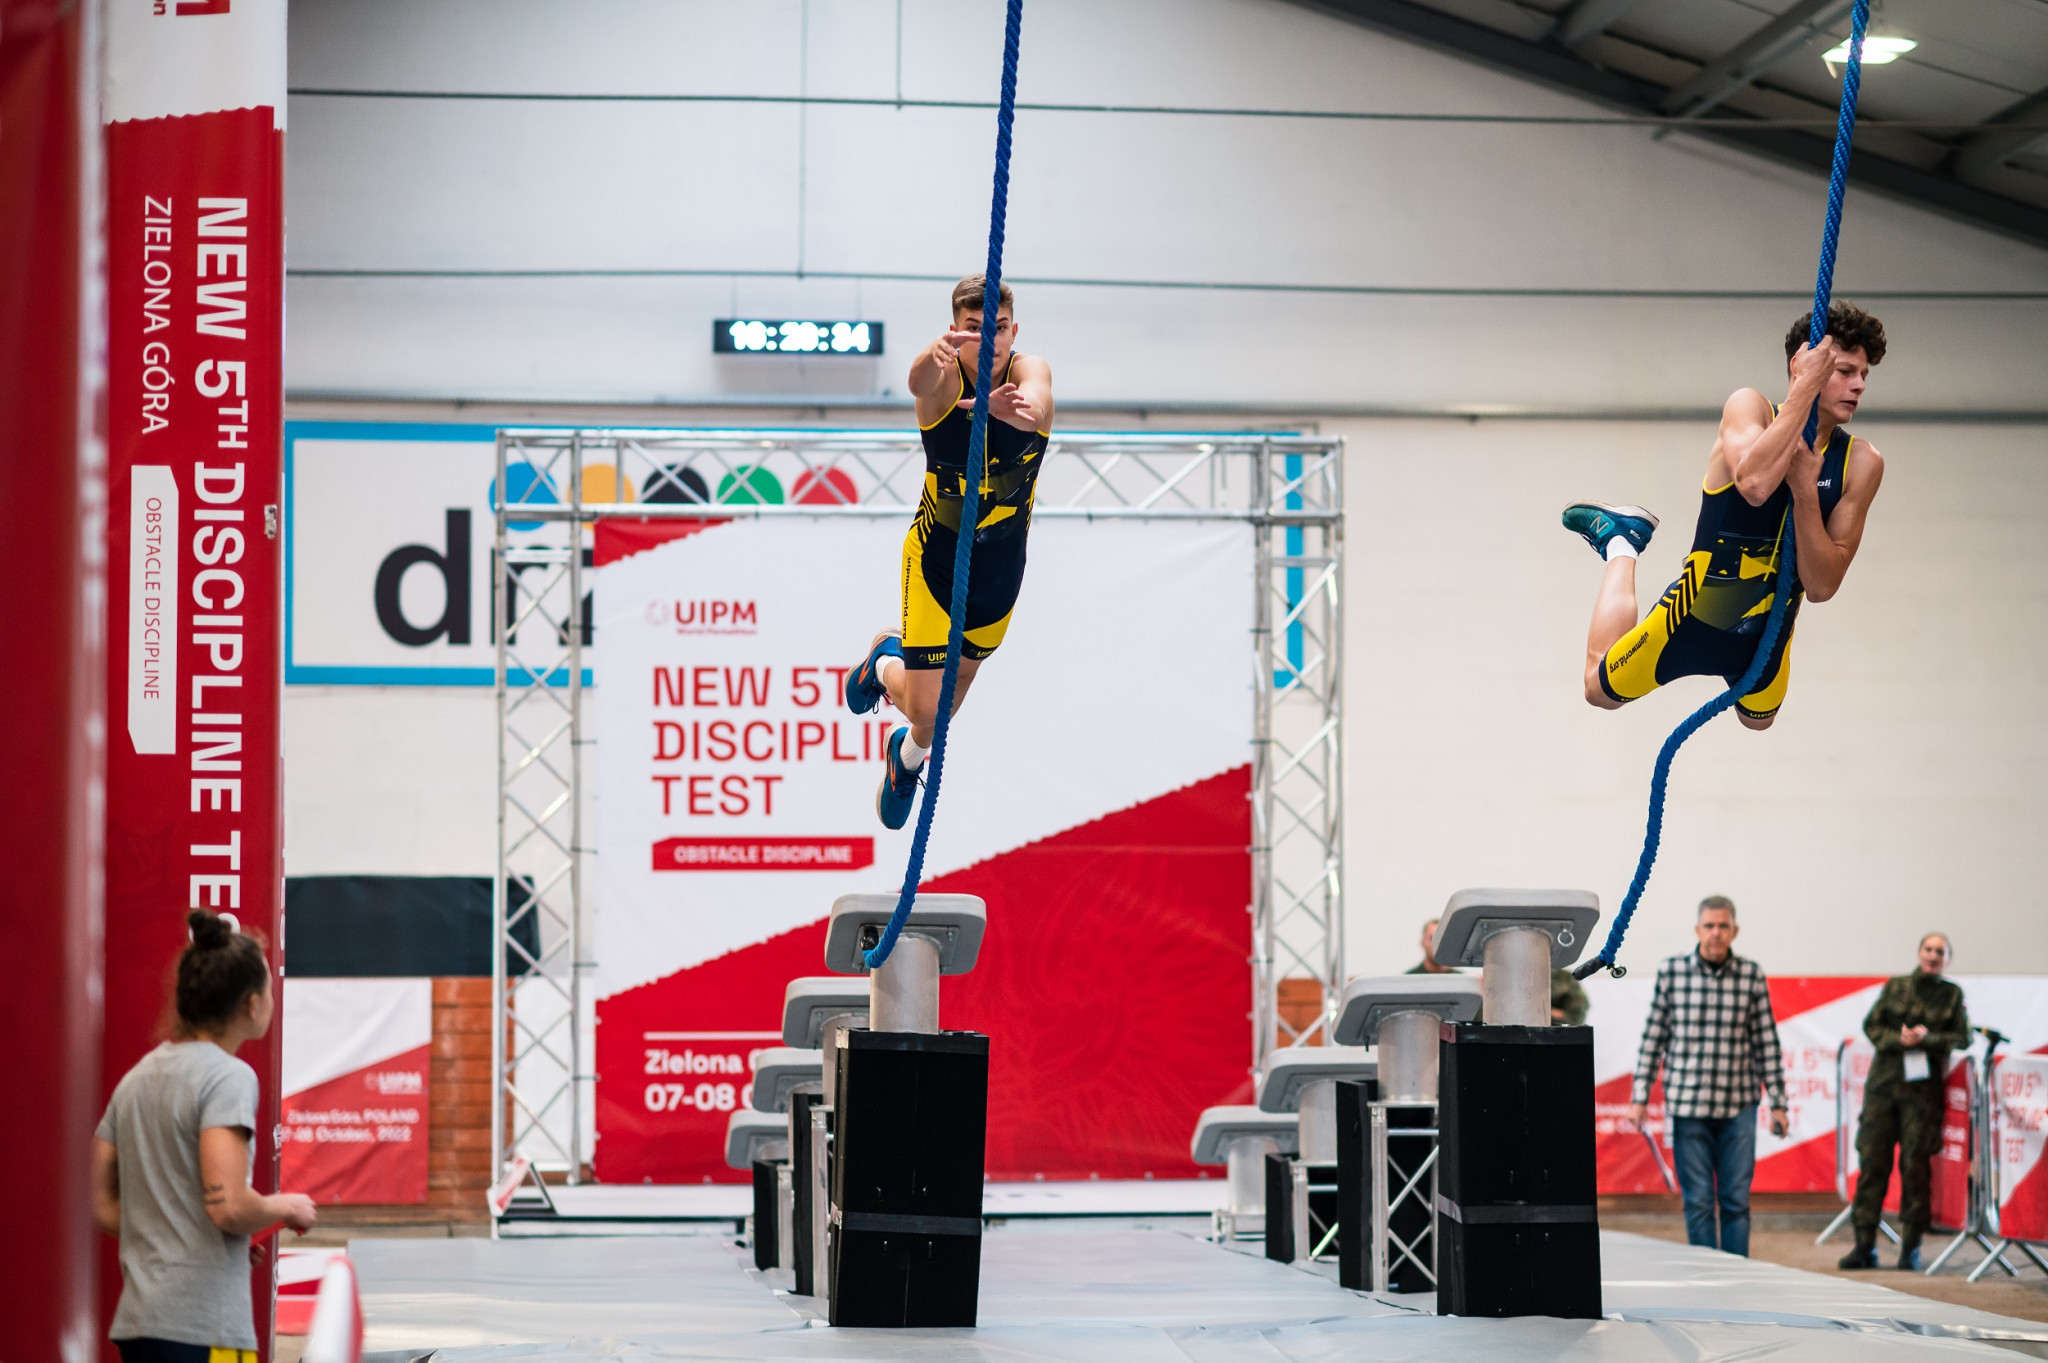 Pierzchała outpaces Polish rival in UIPM obstacle discipline test event